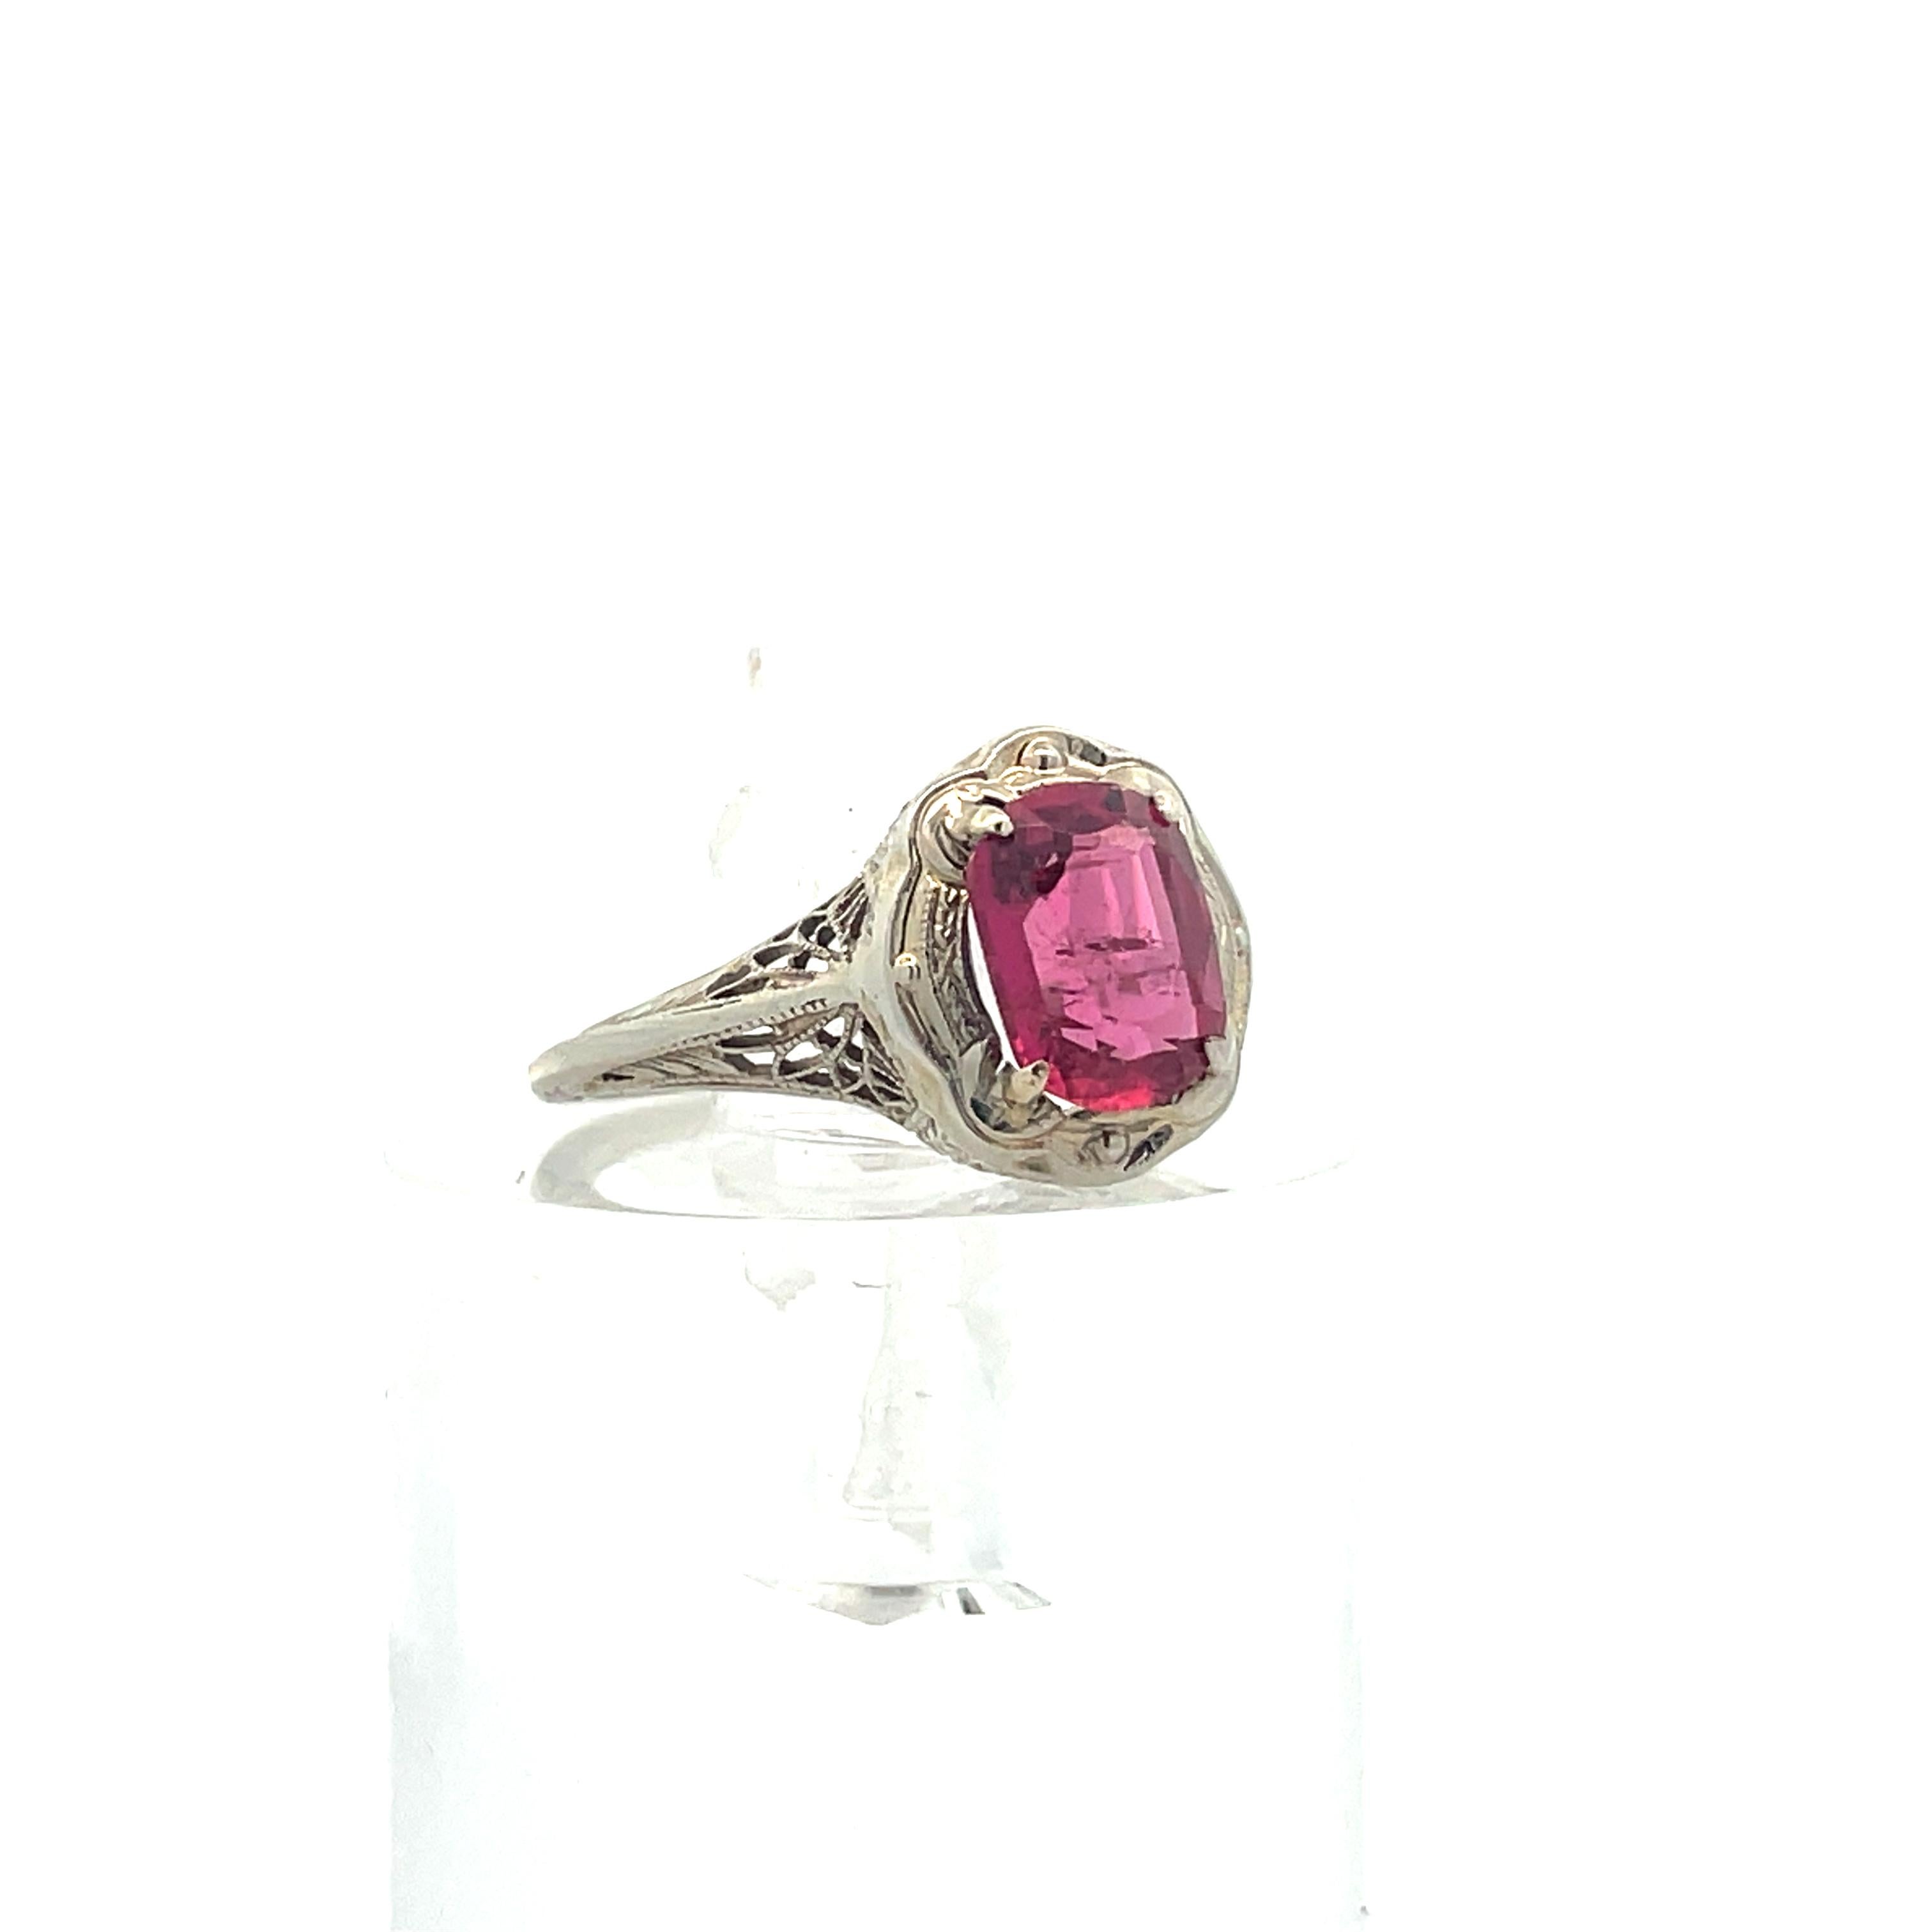 1920s Art Deco 14k White Gold Filigree Red Tourmaline Ring  In Excellent Condition For Sale In Lexington, KY